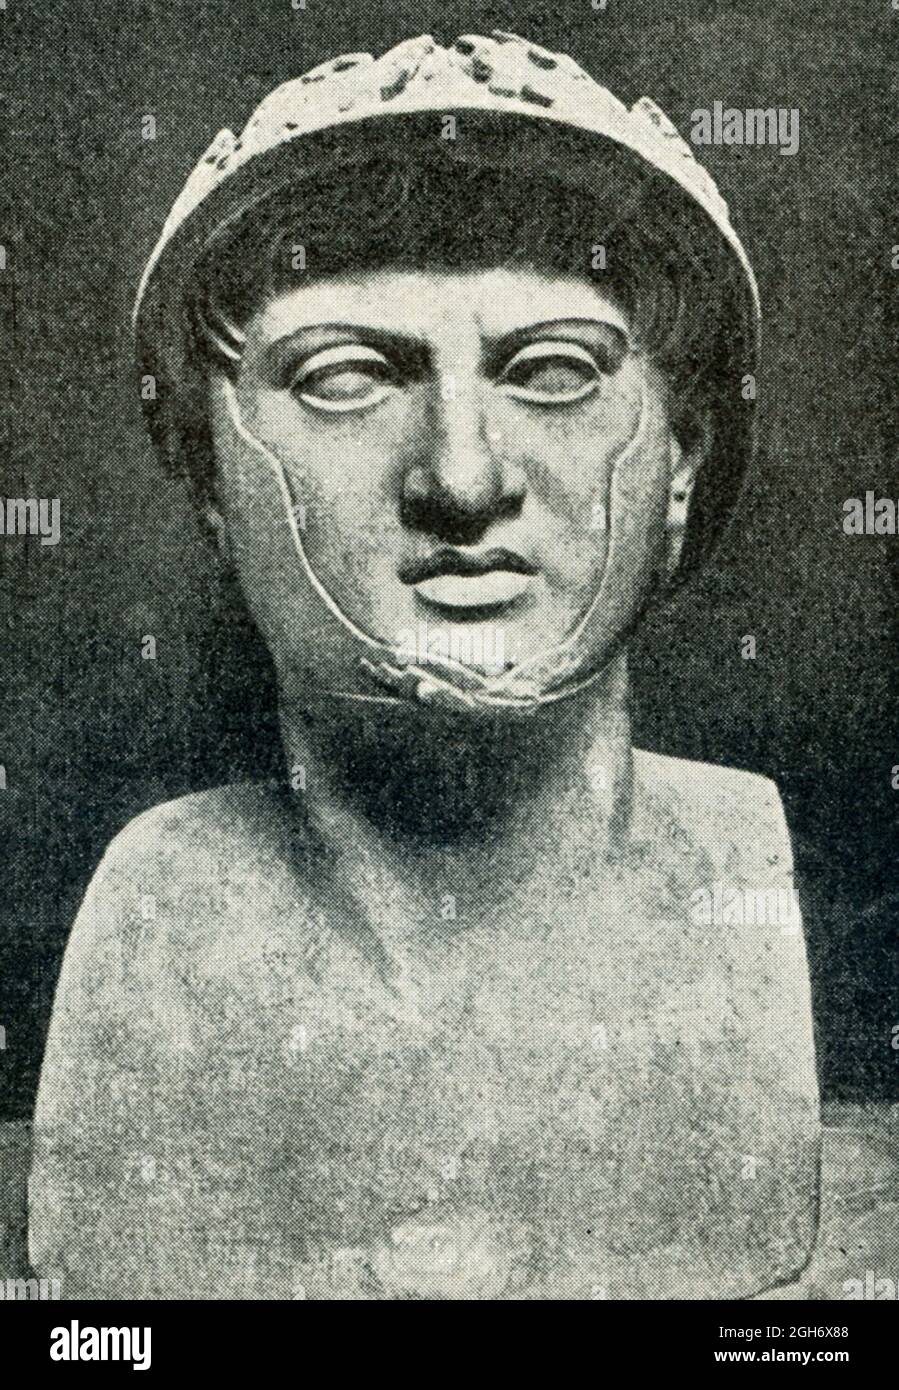 This 1910 photo shows the bust of Pyrrhus that is housed in the museum in Naples. Pyrrhus is best known for the Battle of Heraclea in 280 B.C. The battle was fought between the Romans and Greeks. The Greeks were headed by Pyrrhus, the king of Epirus (a coastal region that lies between northwestern Greece and southern Albania). While Pyrrhus won, both sides lost thousands in the battle, and is said to be one of his earliest Pyrrhic victories. Heraclea was a city in Magna Graecia, in the instep of Italy. Stock Photo